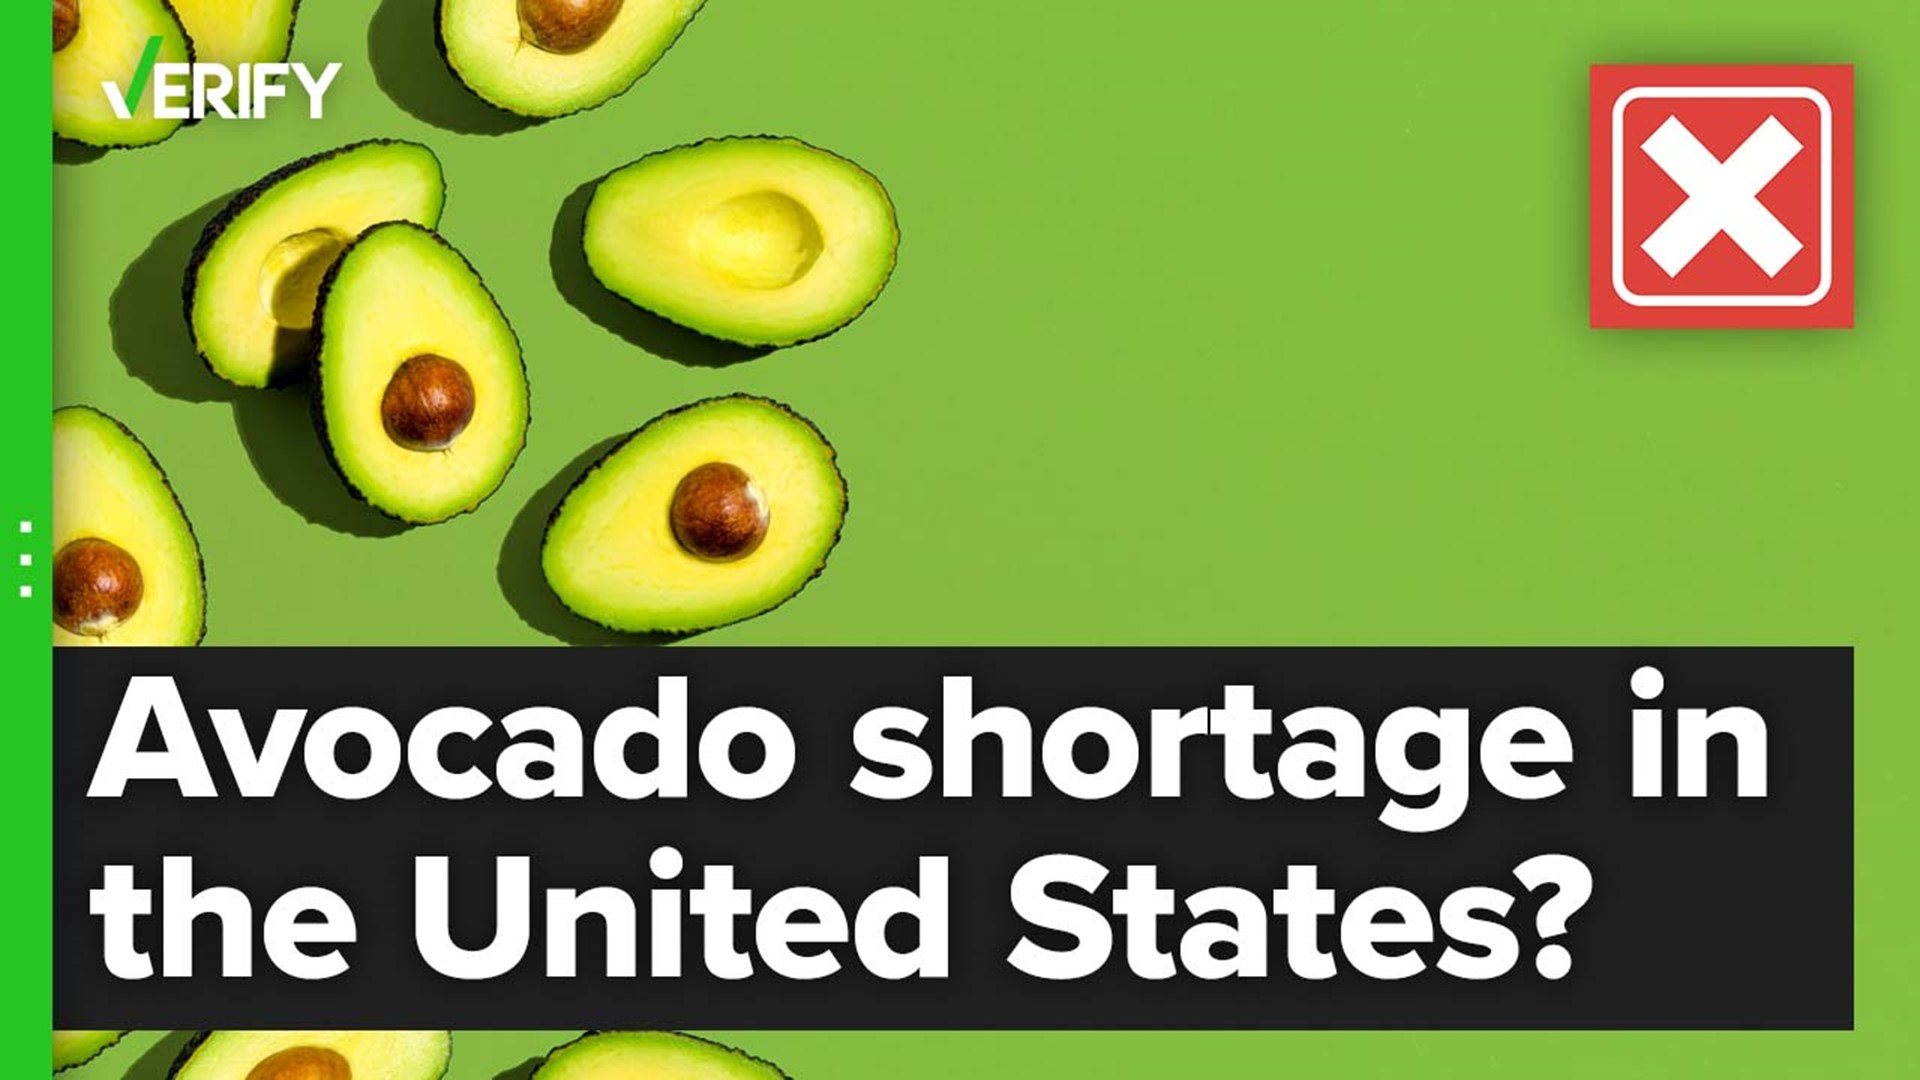 Though the U.S. has lifted its ban on avocados imported from Mexico, you could still see higher prices in the coming days due to missing shipments.